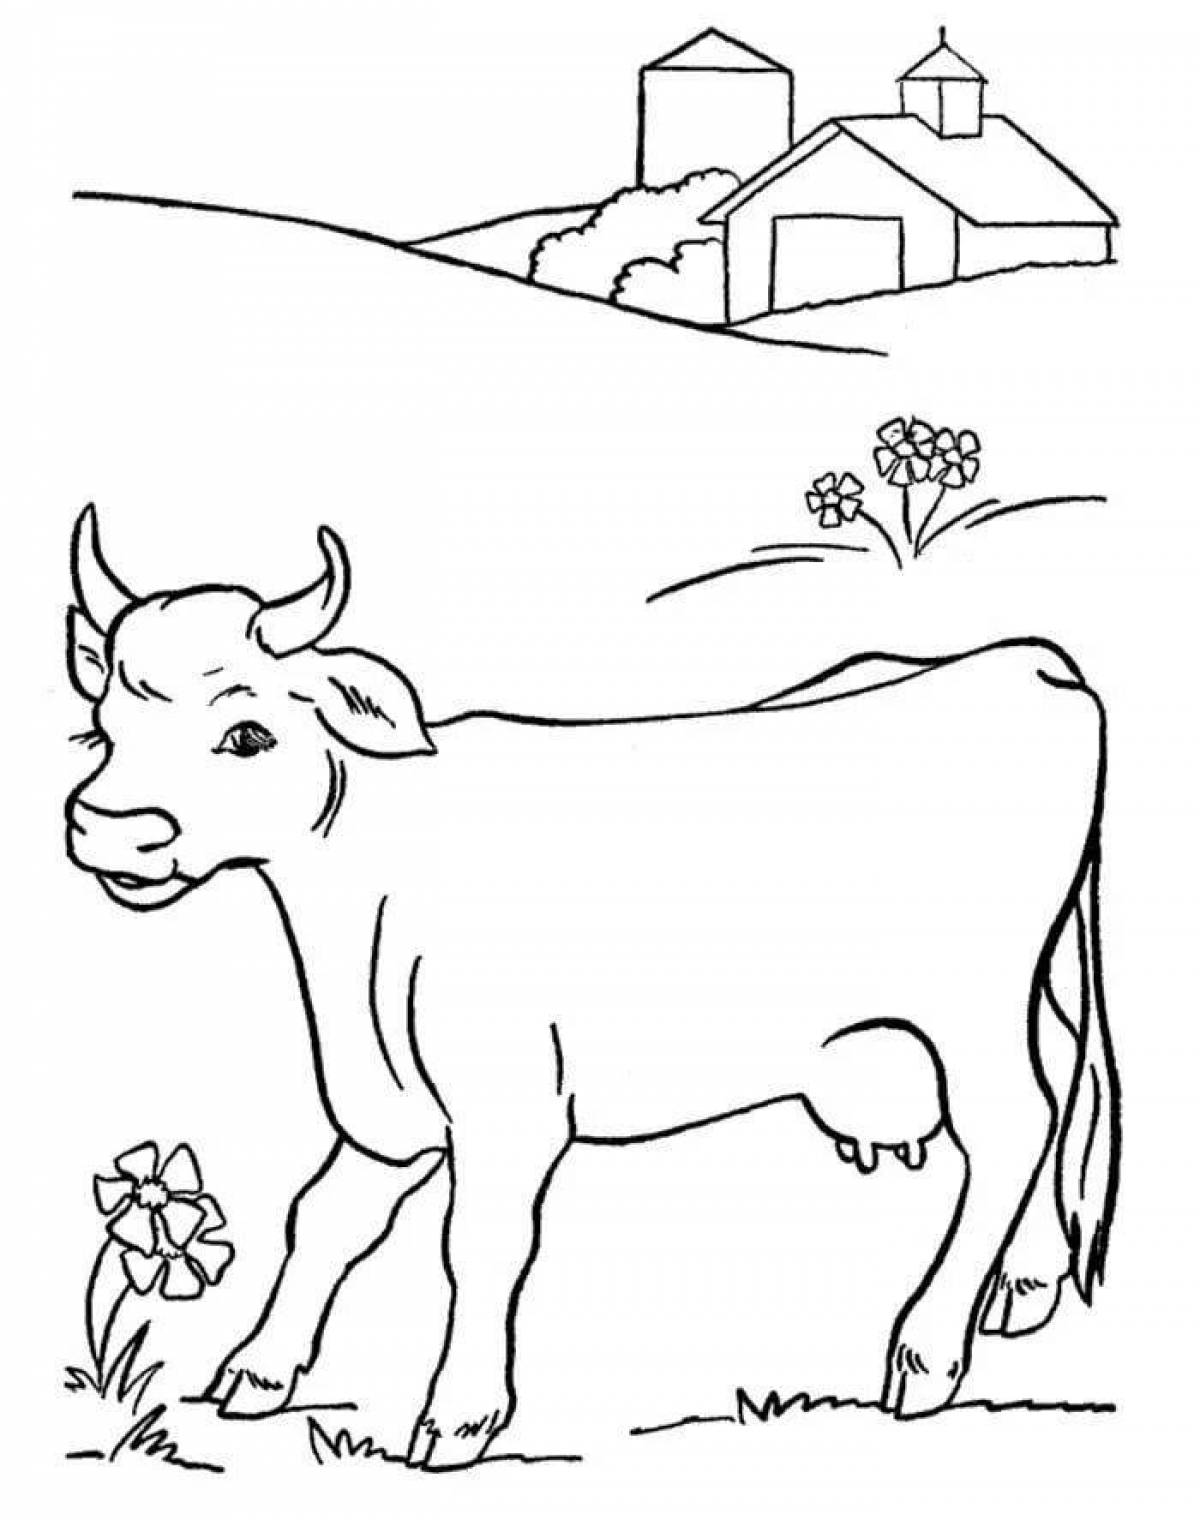 Fun pet coloring pages for 5-6 year olds